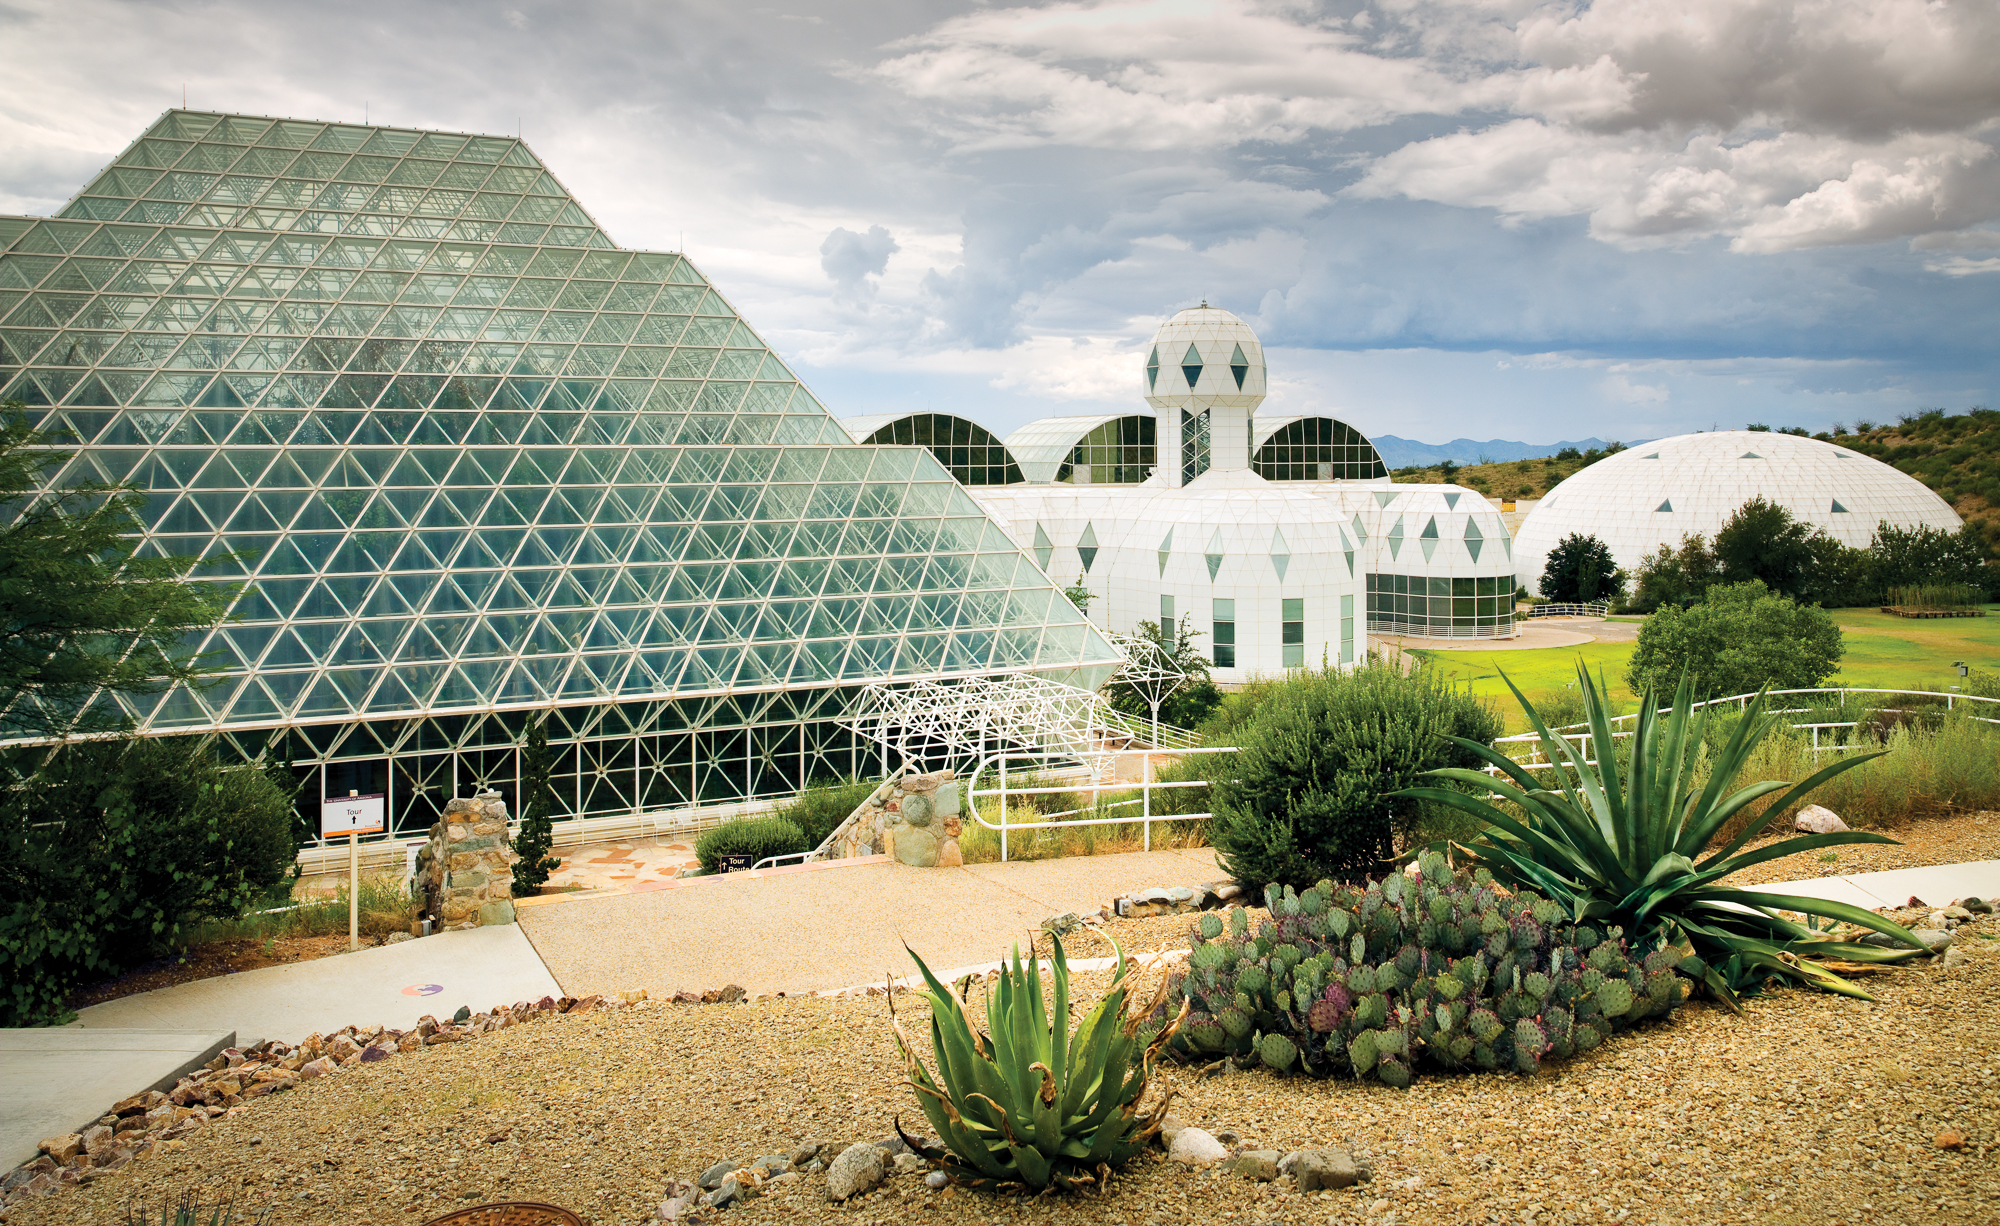 Biosphere 2 Not Such a Bust